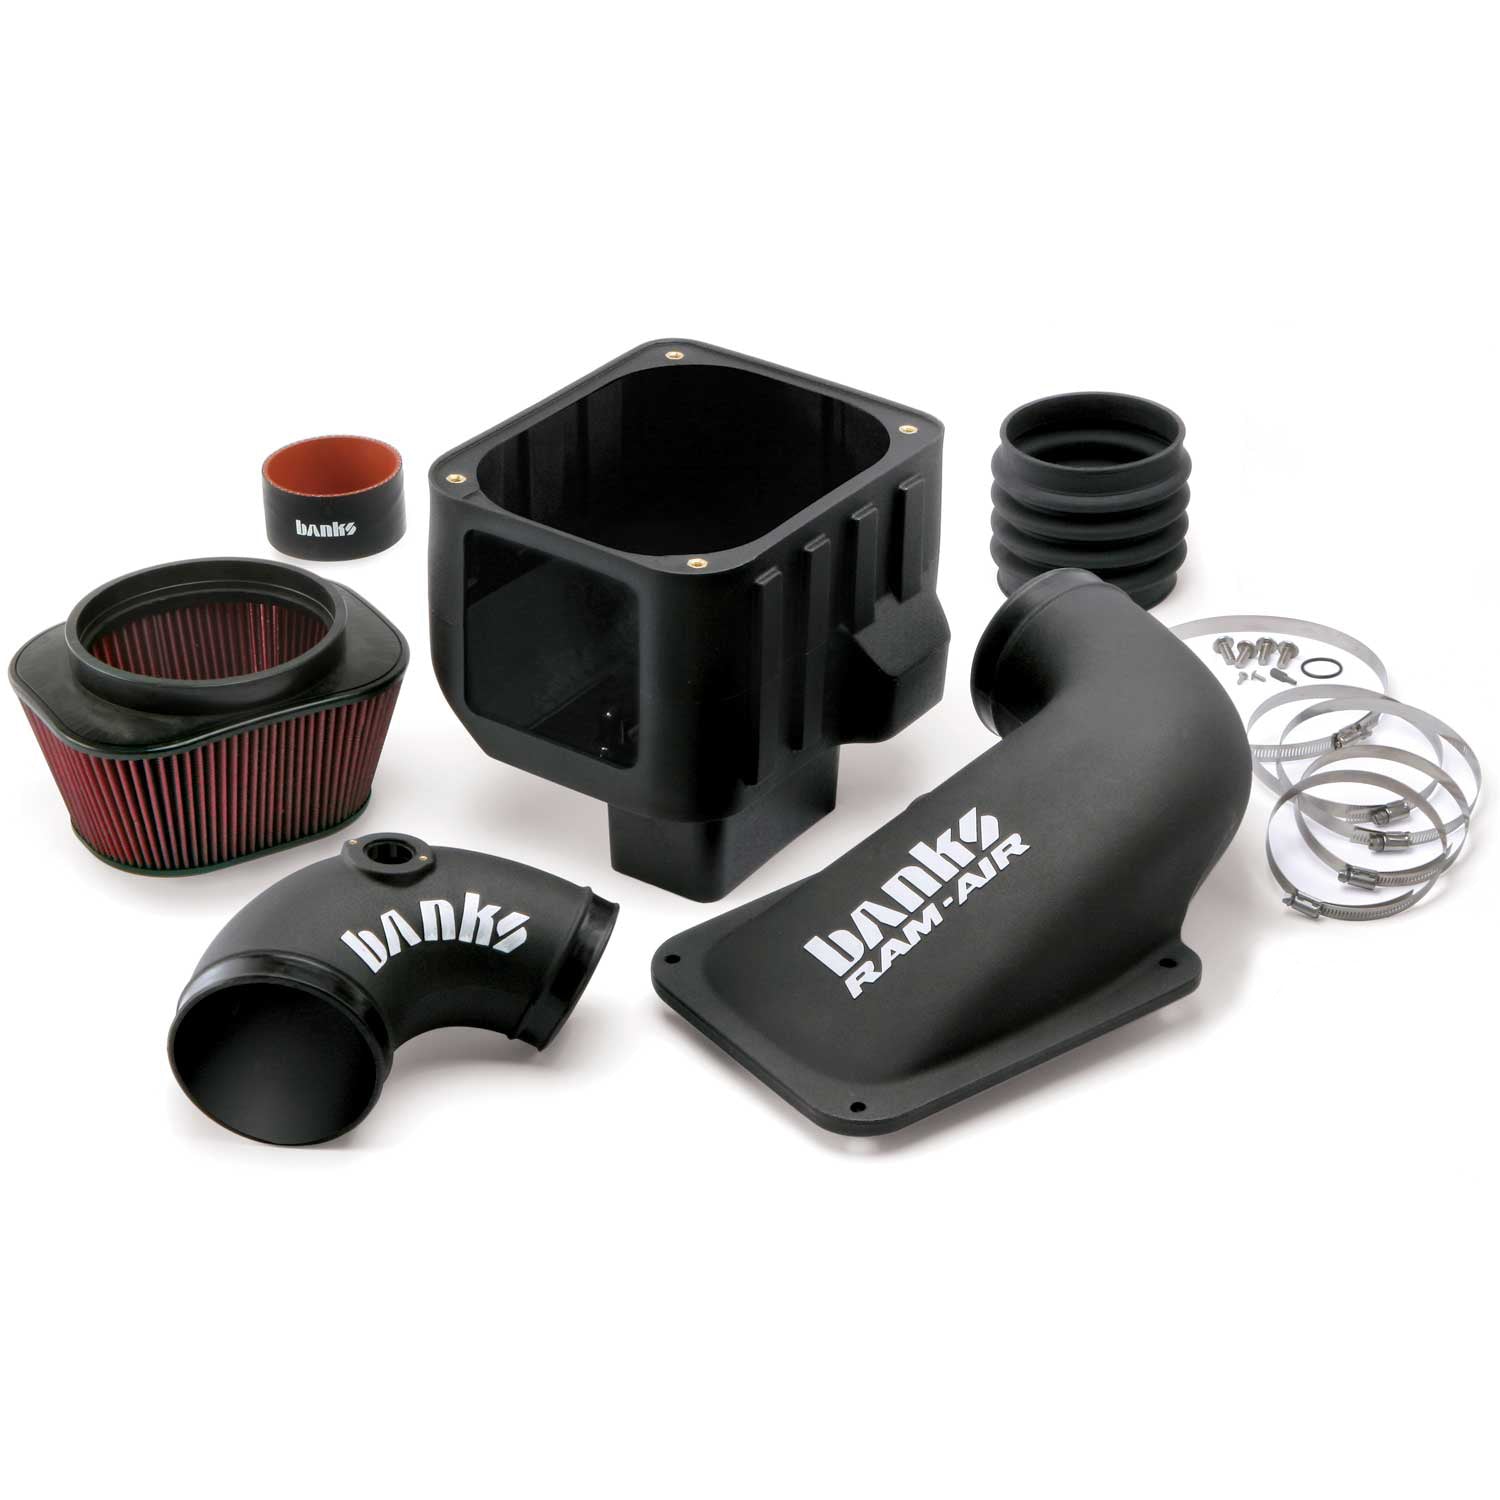 Components use in the Banks Ram-Air intake for 2006-2007 Duramax LBZ